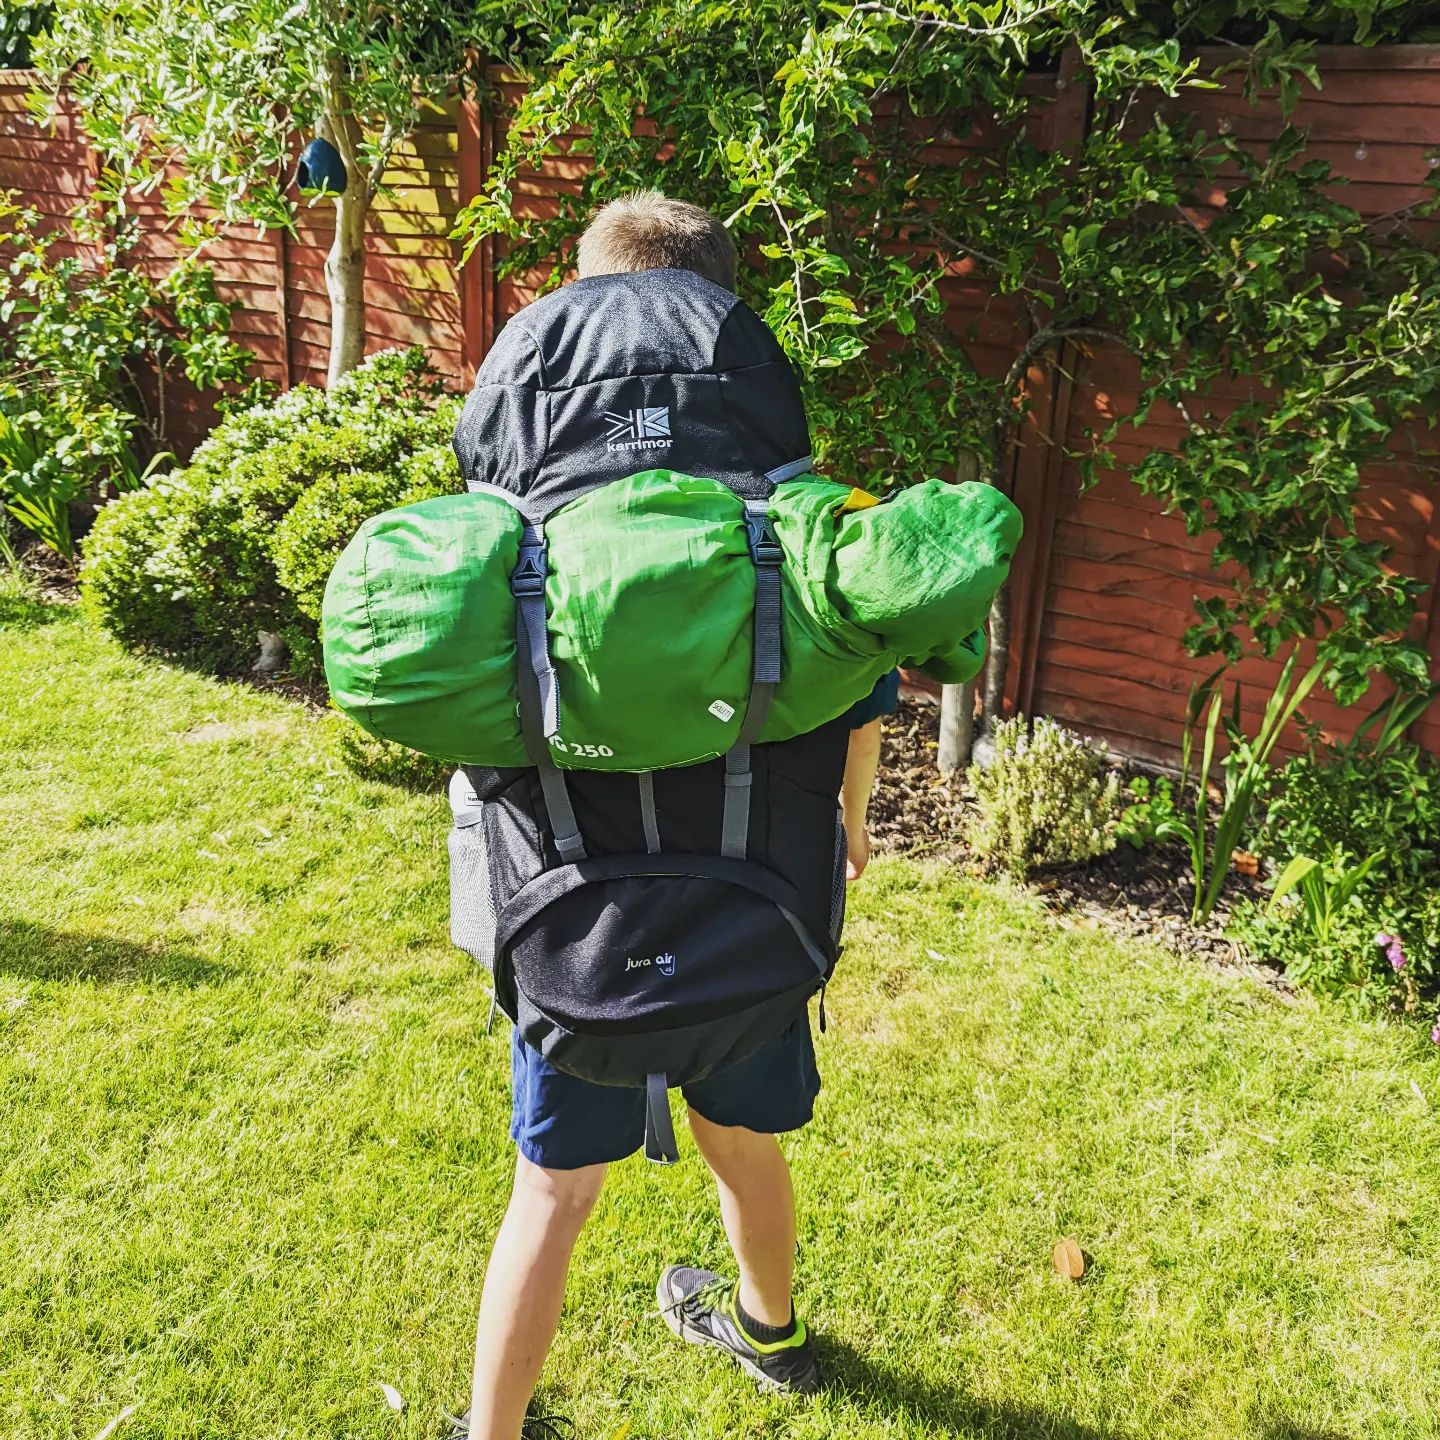 And off he trundles, Strategy 2022 with his Scout unit and several thousand young people!Hope you have an amazing time young man and we'll see you grubby, tired and full of exciting new memories on Sunday!#scouts #camping #strategy #camp #skillsforlife #scouting #scoutcamp #memories #makingmemories